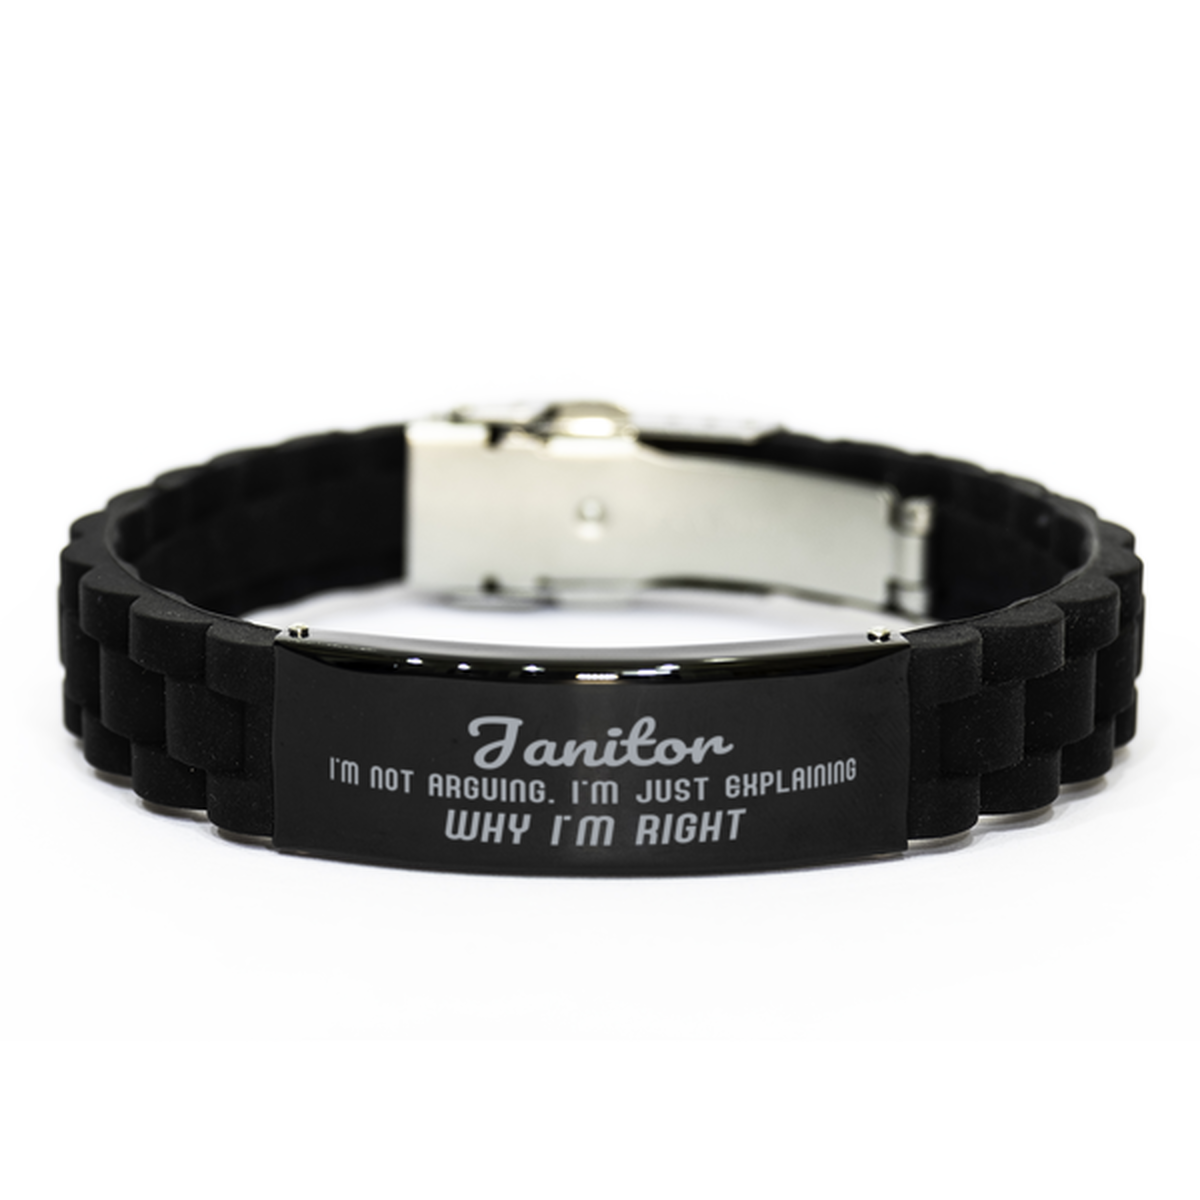 Janitor I'm not Arguing. I'm Just Explaining Why I'm RIGHT Black Glidelock Clasp Bracelet, Funny Saying Quote Janitor Gifts For Janitor Graduation Birthday Christmas Gifts for Men Women Coworker